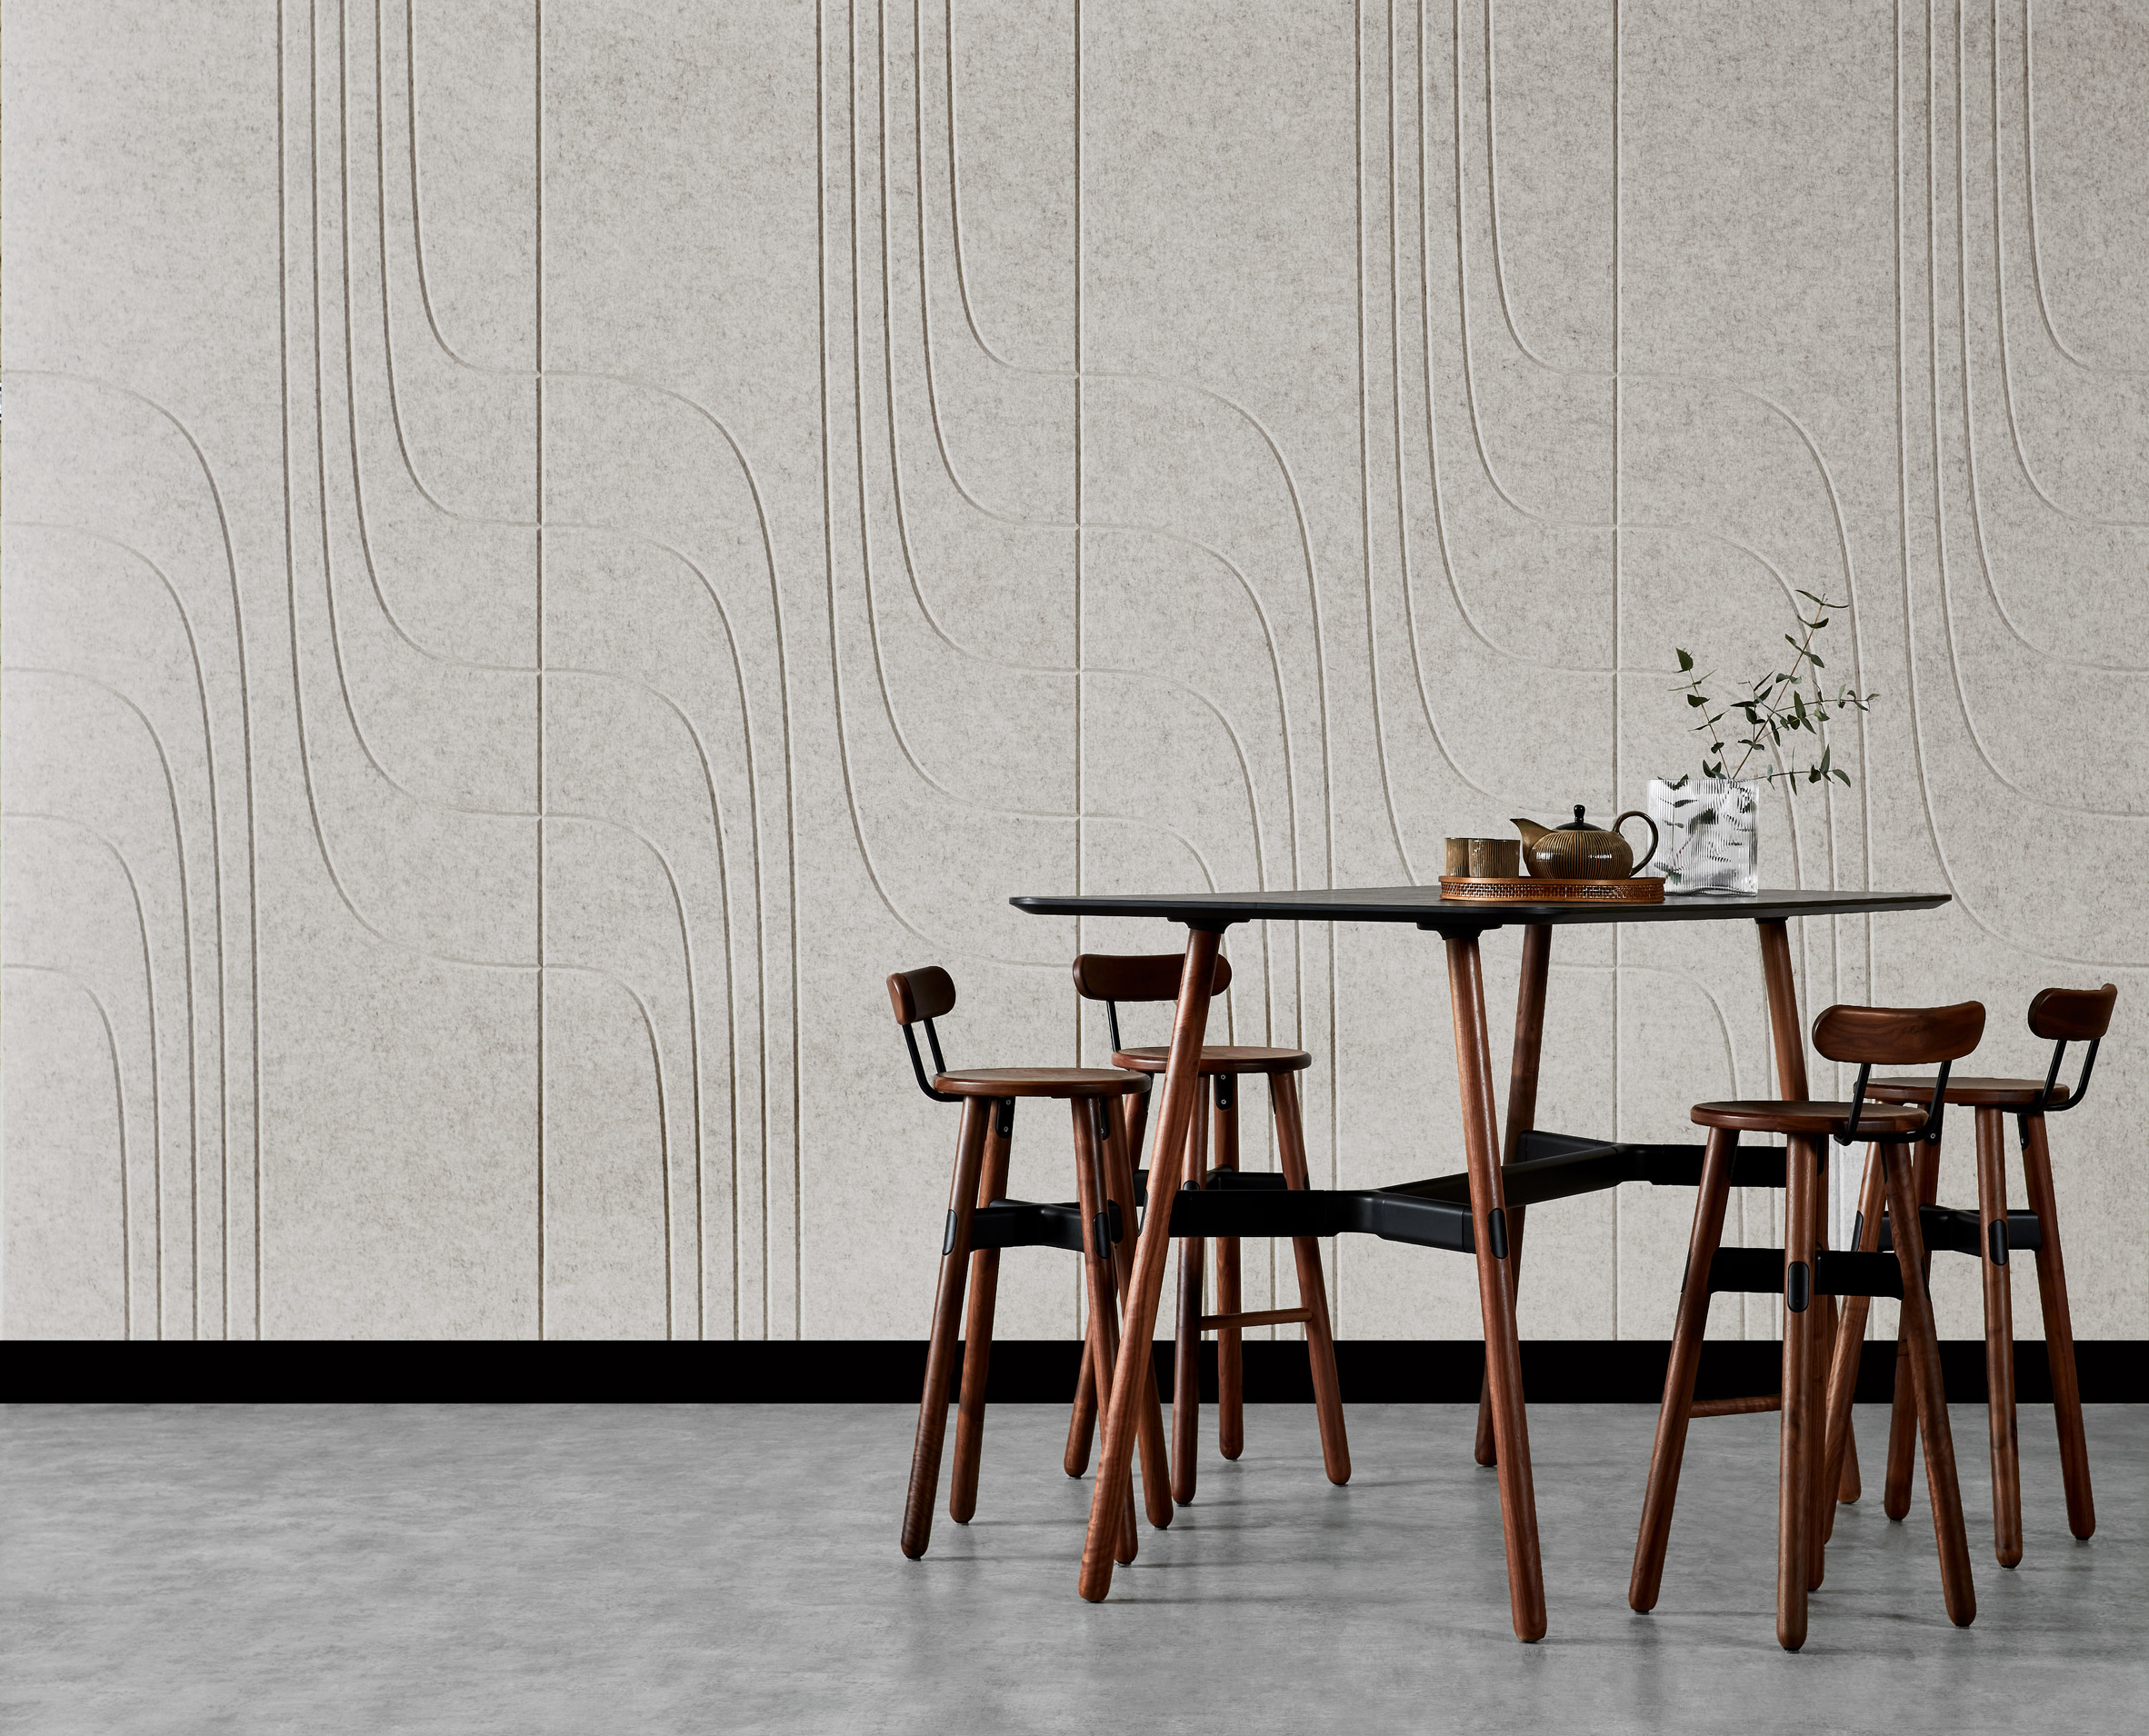 Patterned beige acoustic wall panels